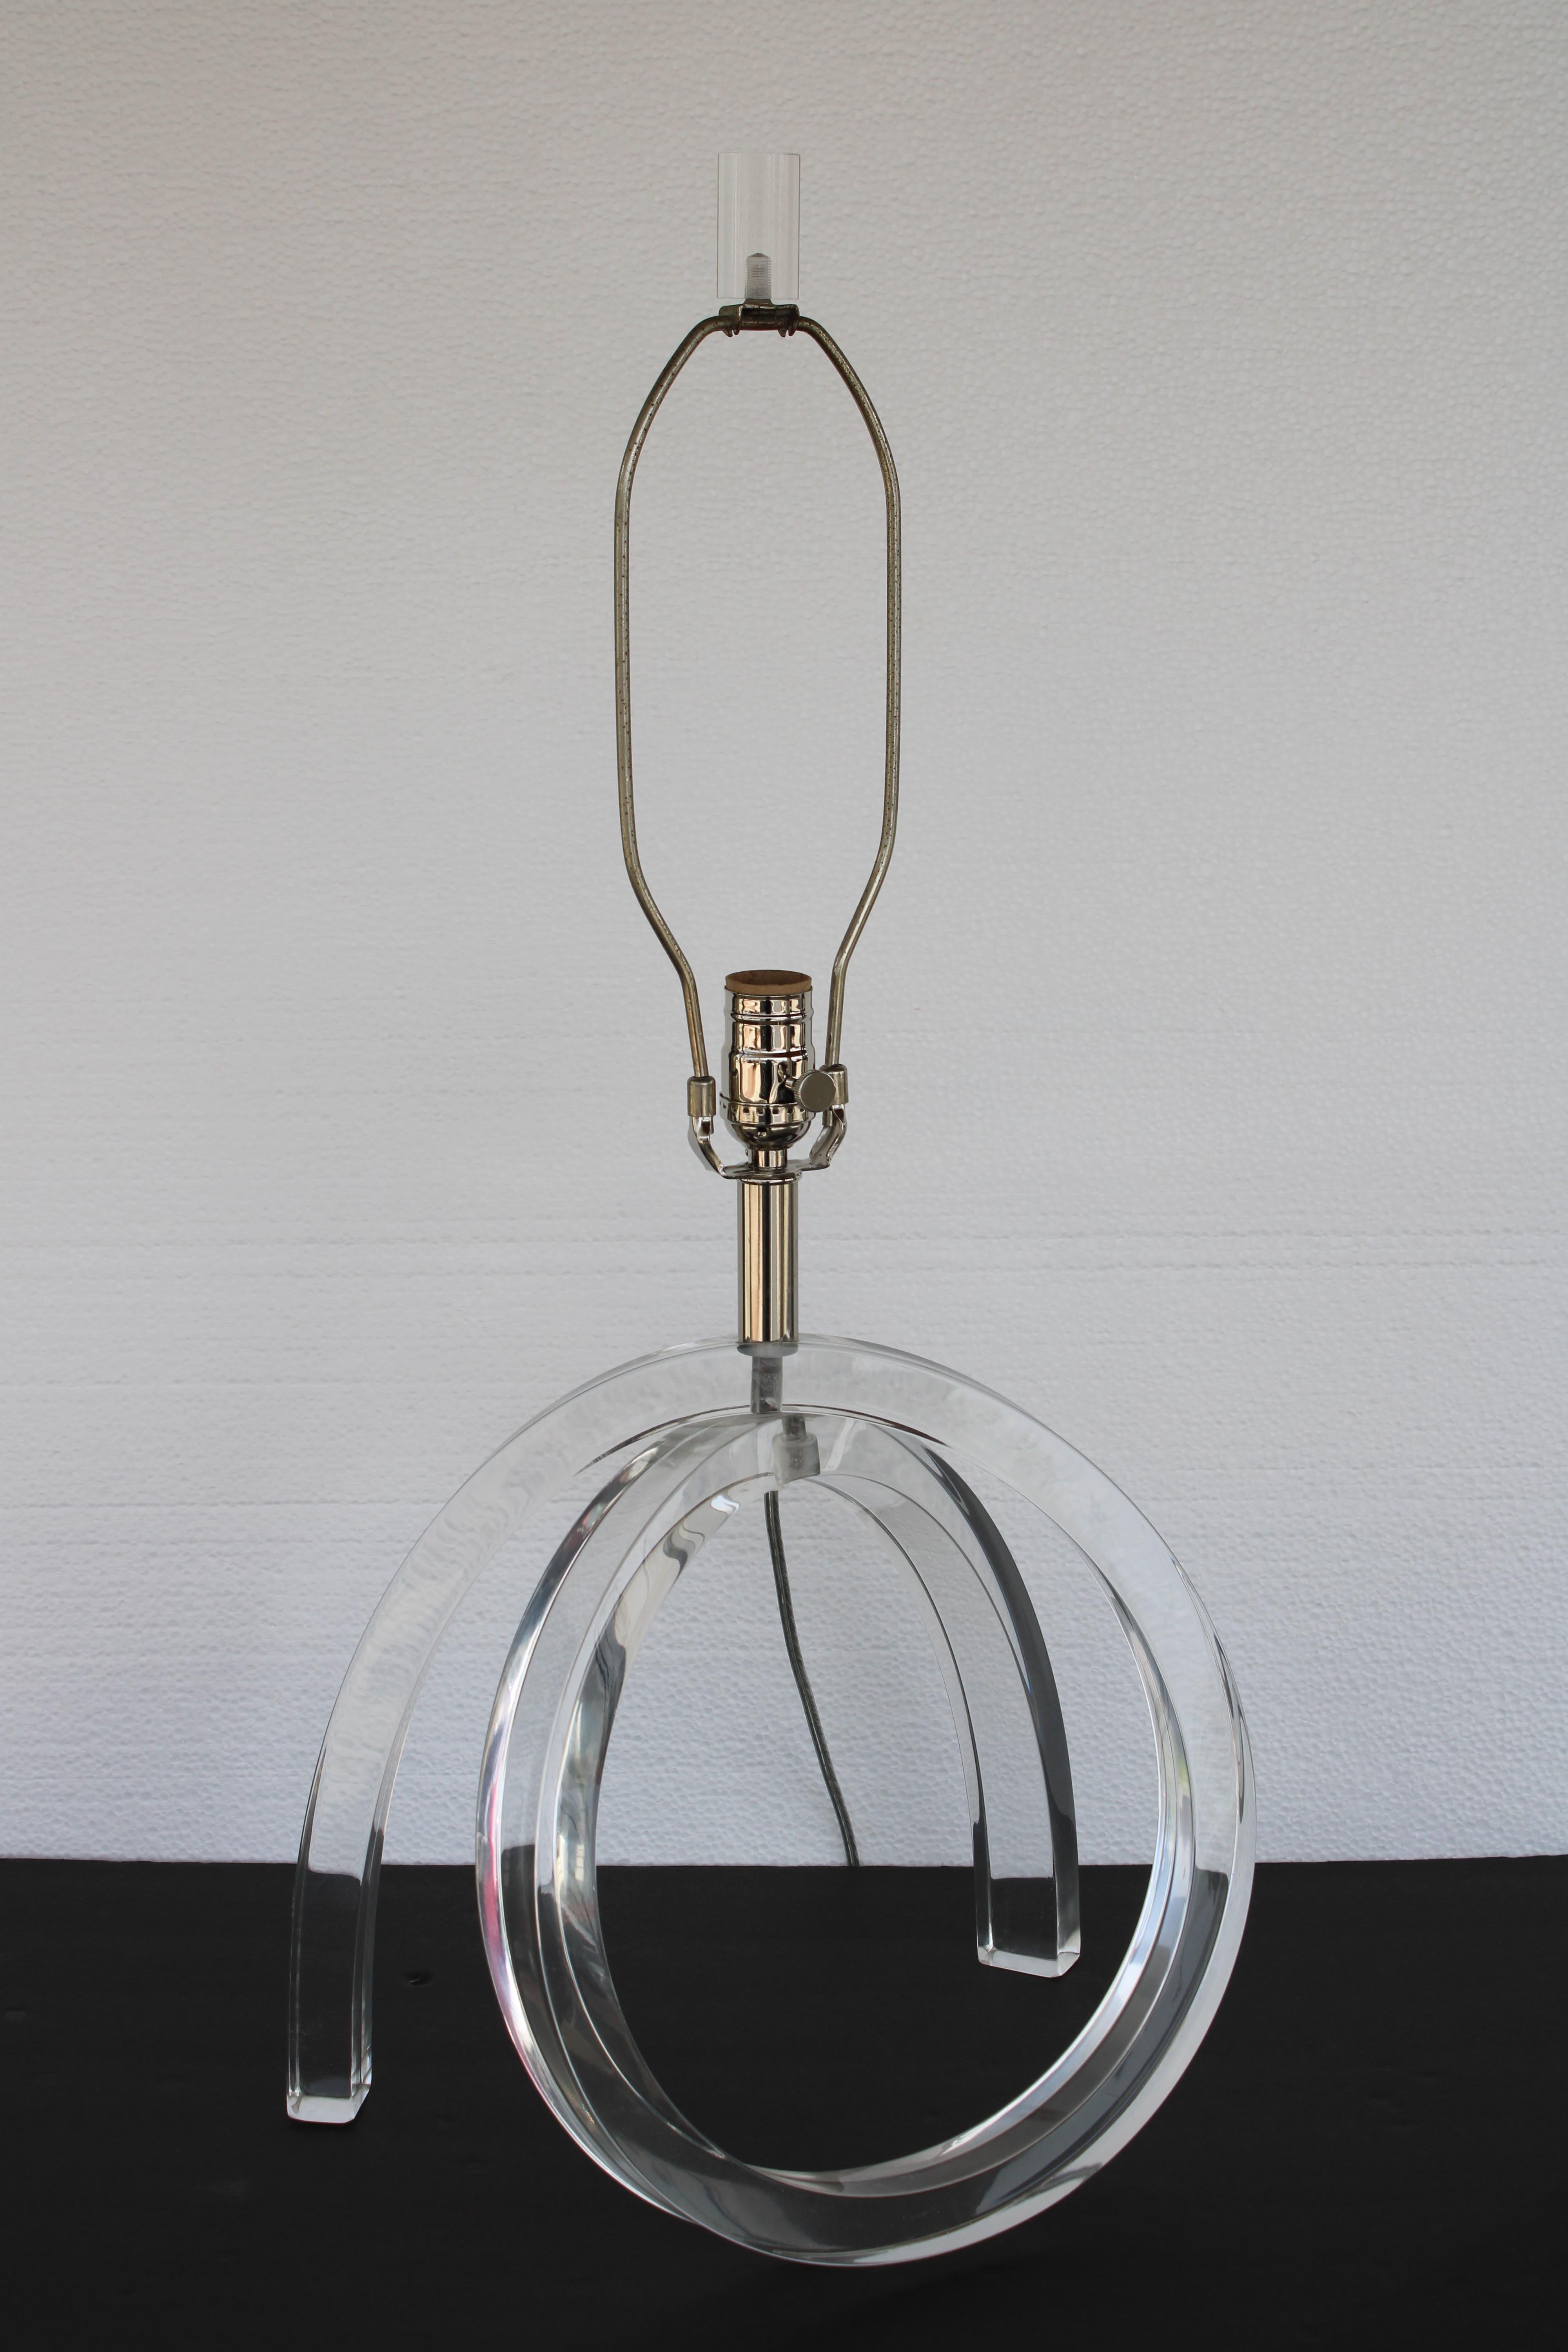 Lucite lamp attributed to Astrolite for the Ritts Company, Los Angeles, CA. Lamp measures 14